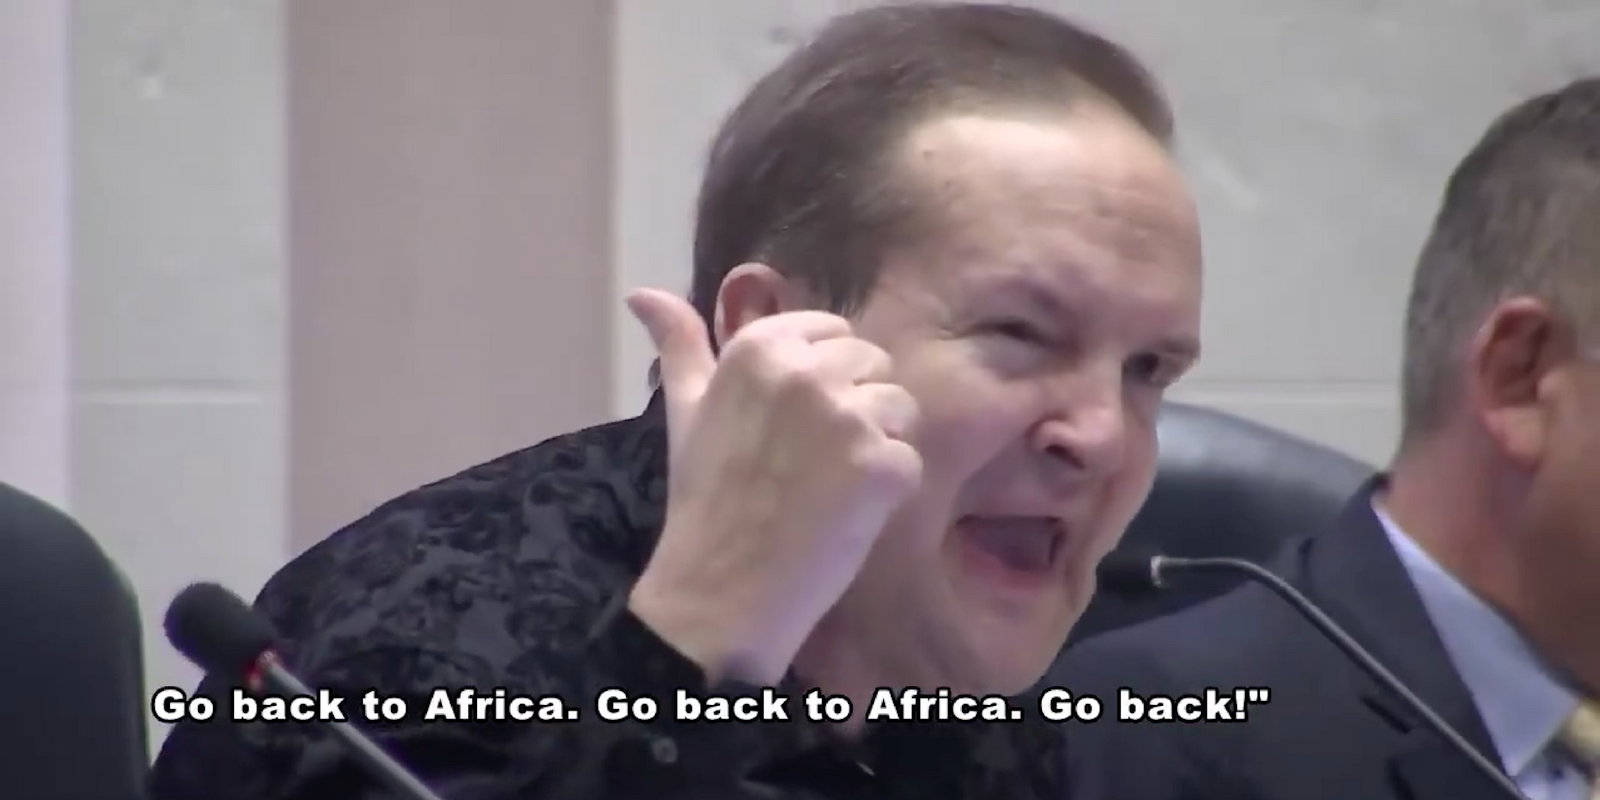 Paul Congemi, St. Petersburg, Florida, mayoral candidate, telling constituents to 'go back to Africa'